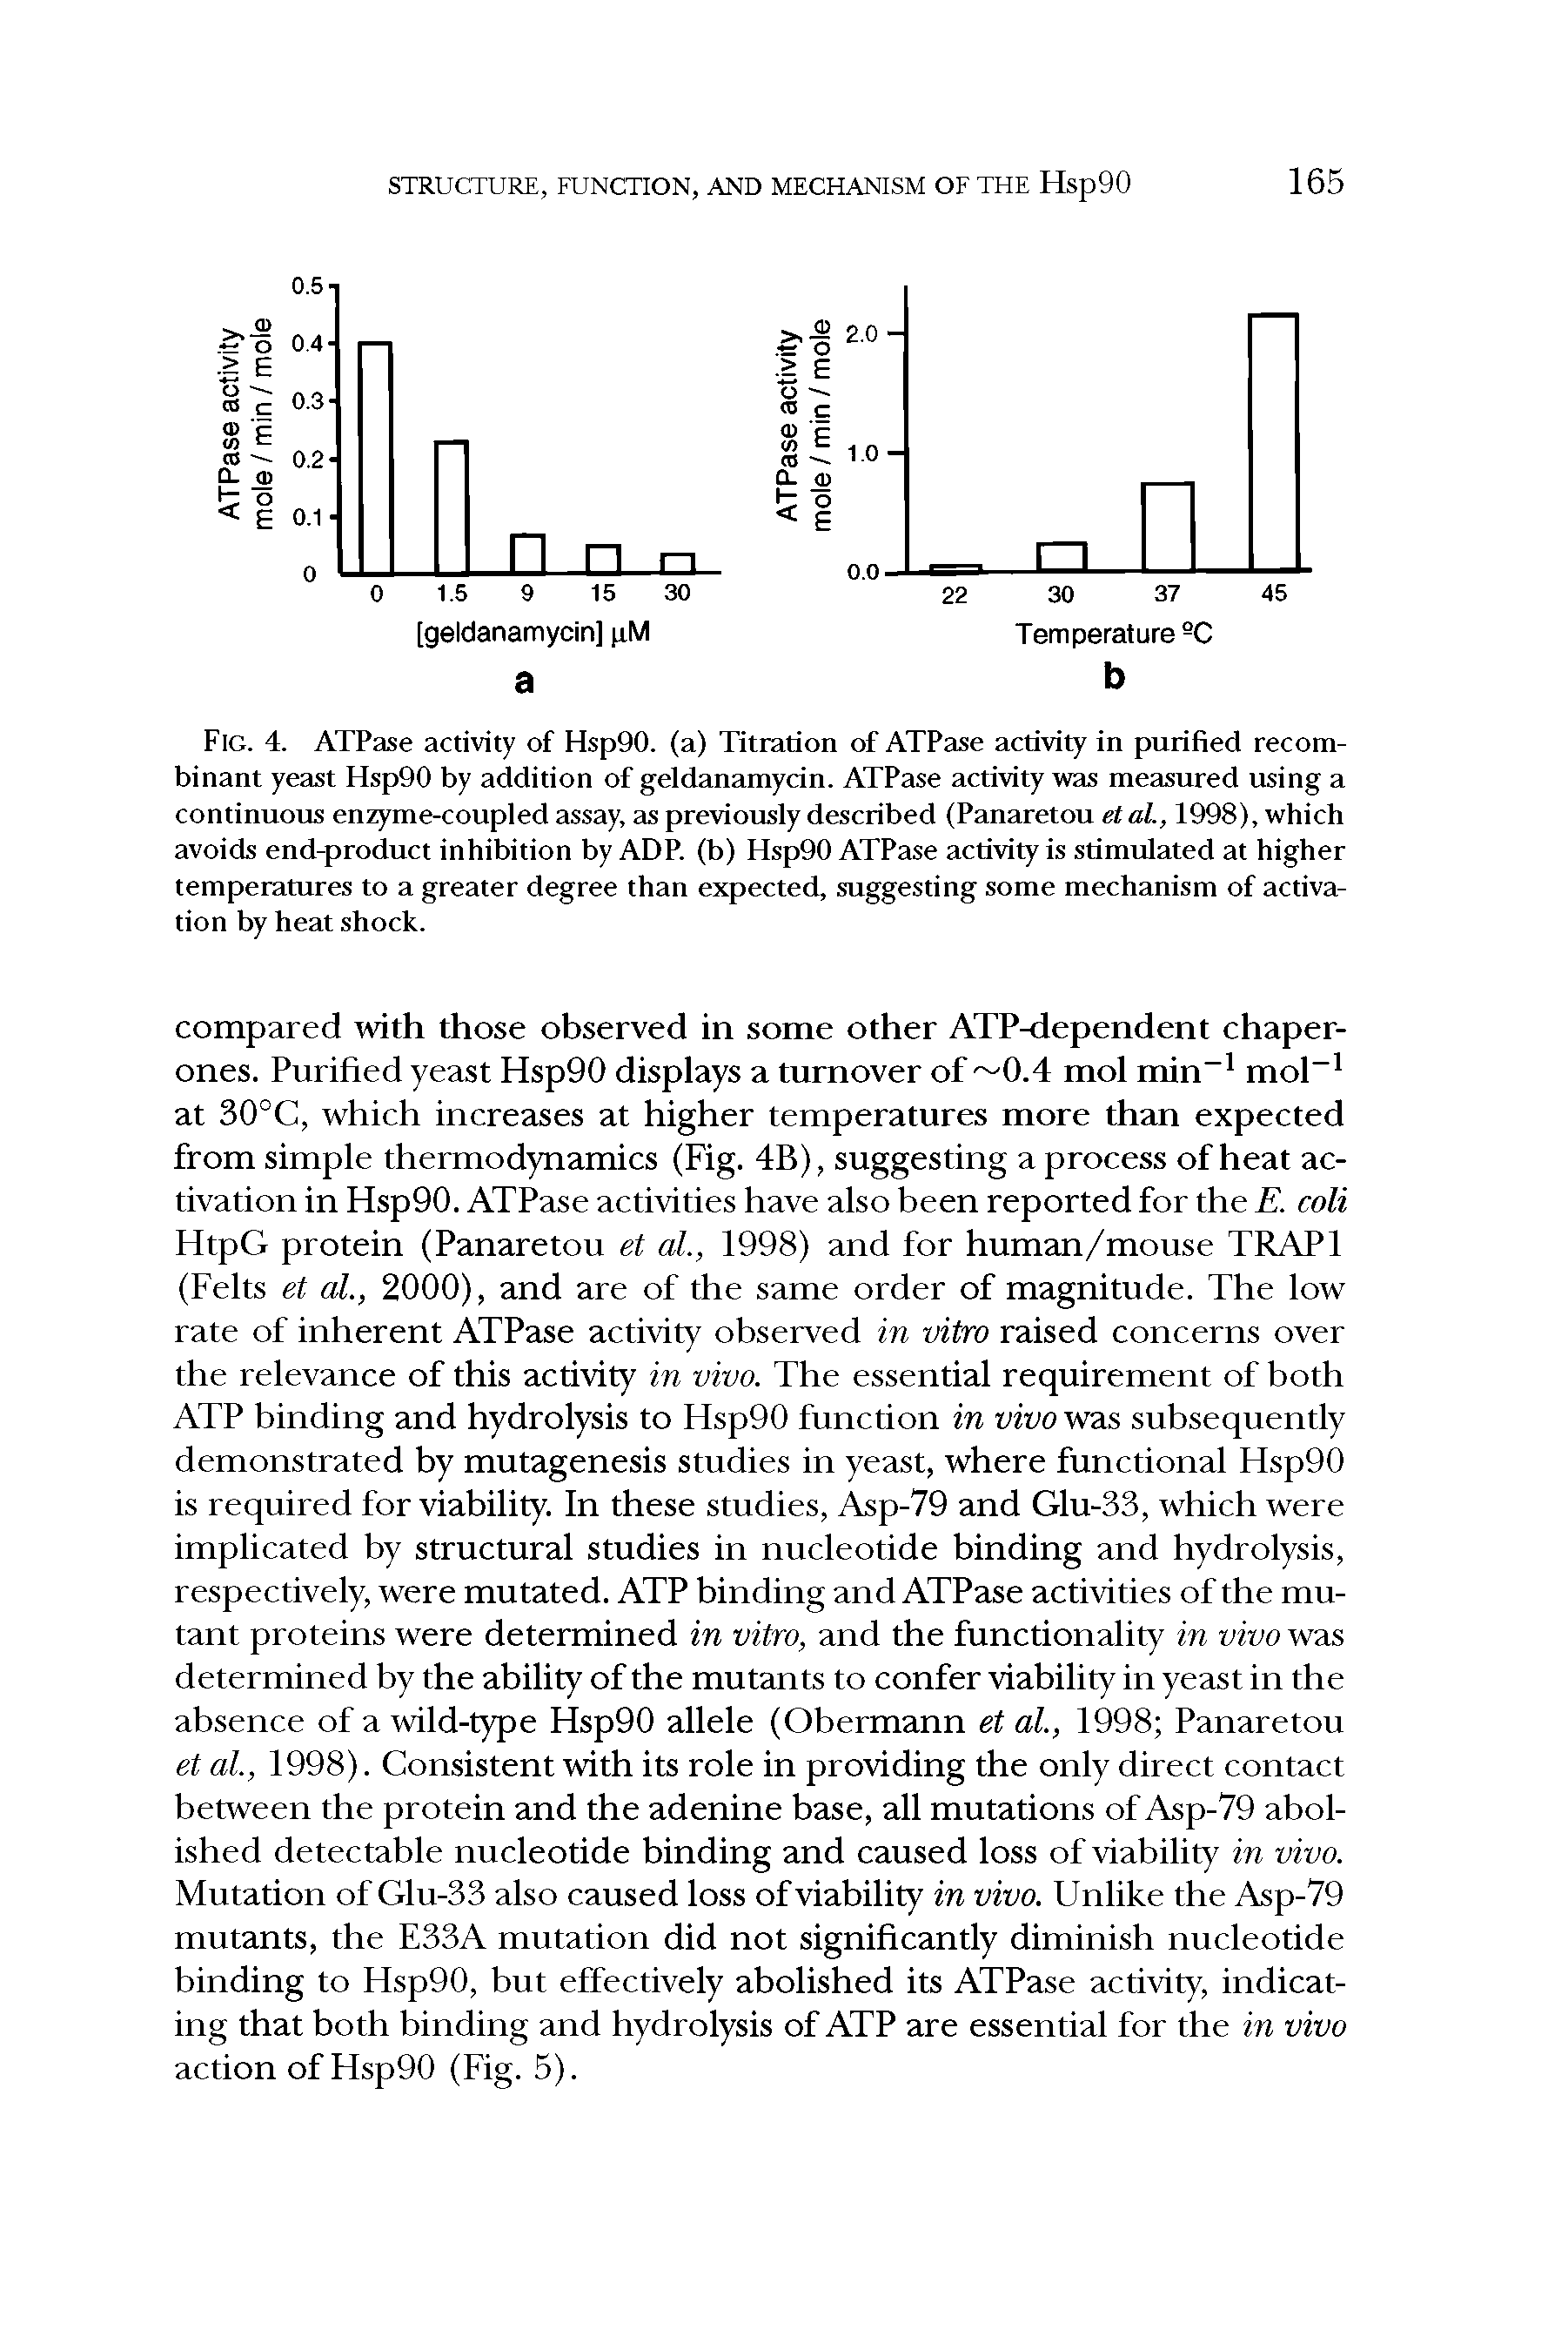 Fig. 4. ATPase activity of Hsp90. (a) Titration of ATPase activity in purified recombinant yeast ffsp90 by addition of geldanamycin. ATPase activity was measured using a continuous enzyme-coupled assay, as previously described (Panaretou et al, 1998), which avoids end-product inhibition by ADP. (b) Hsp90 ATPase activity is stimulated at higher temperatures to a greater degree than expected, suggesting some mechanism of activation by heat shock.